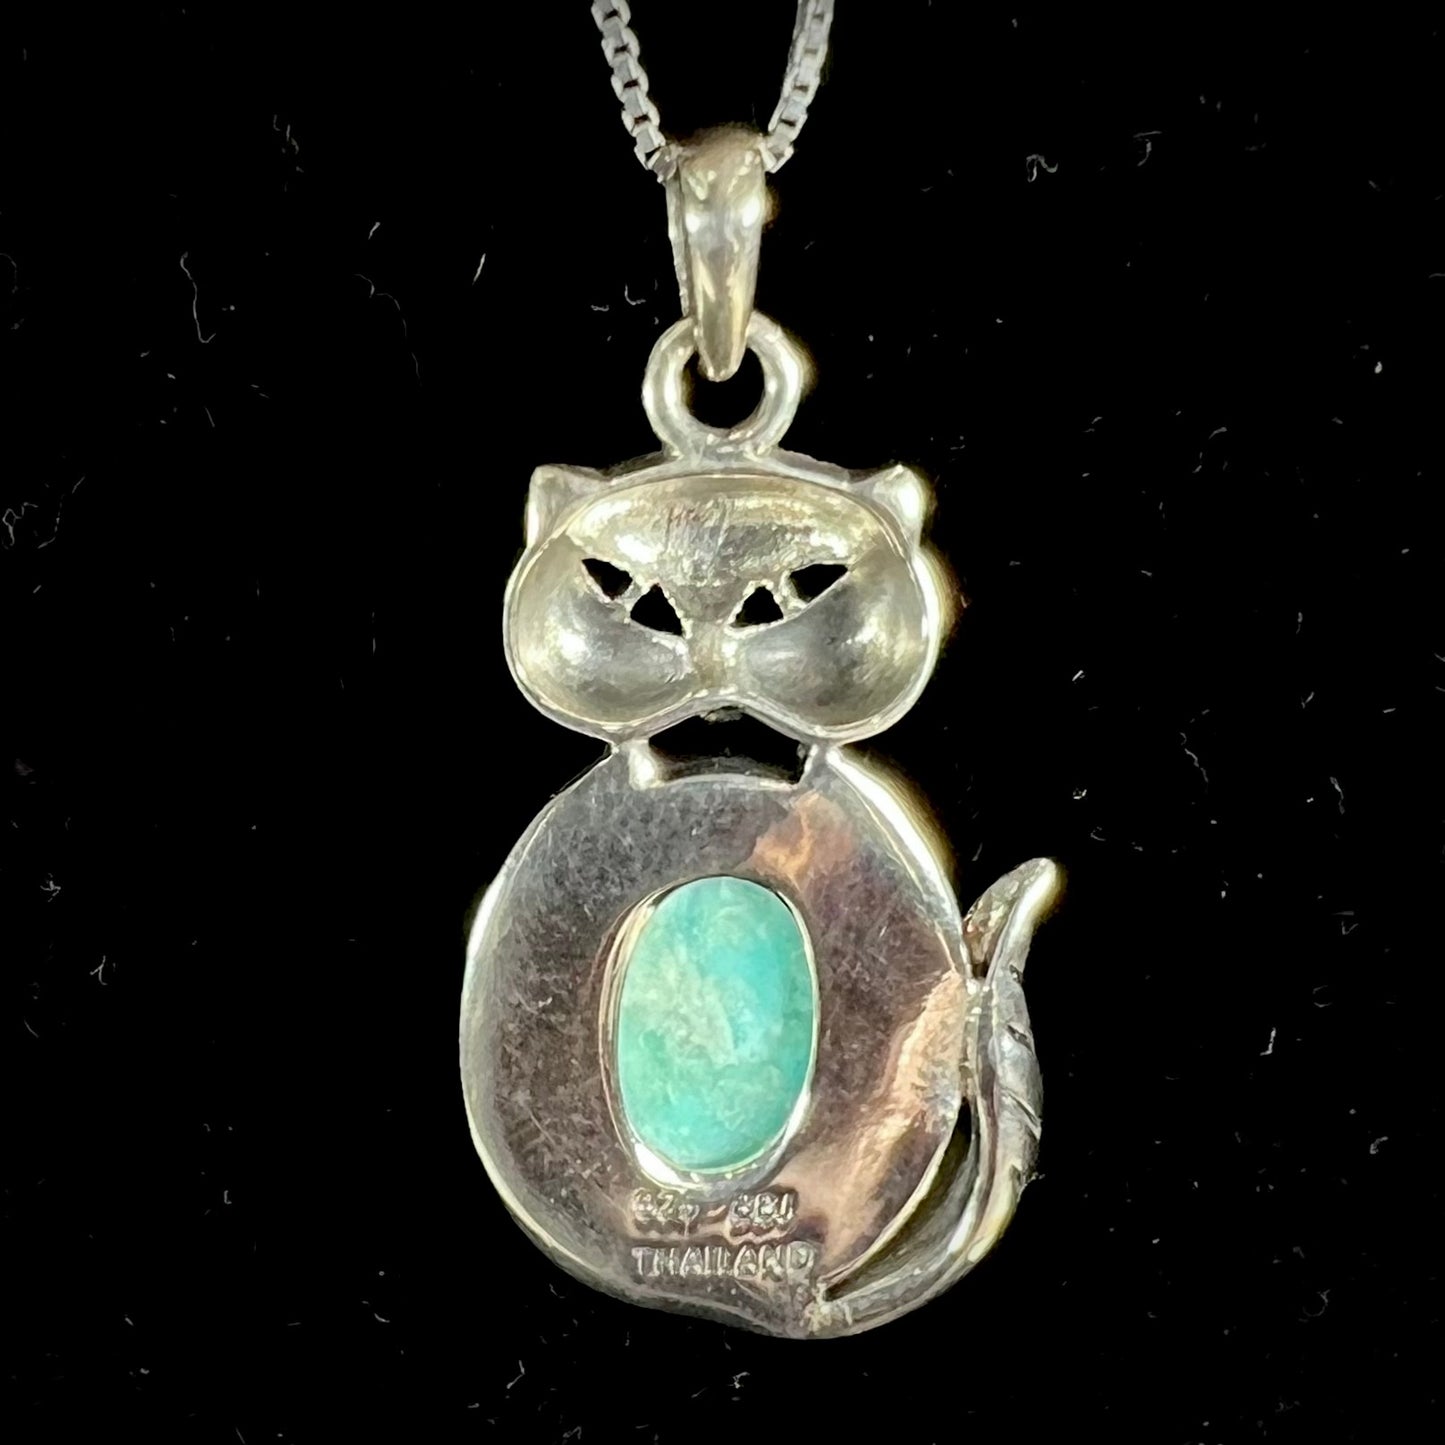 A sterling silver cat necklace set with an oval cut Sleeping Beauty turquoise stone.